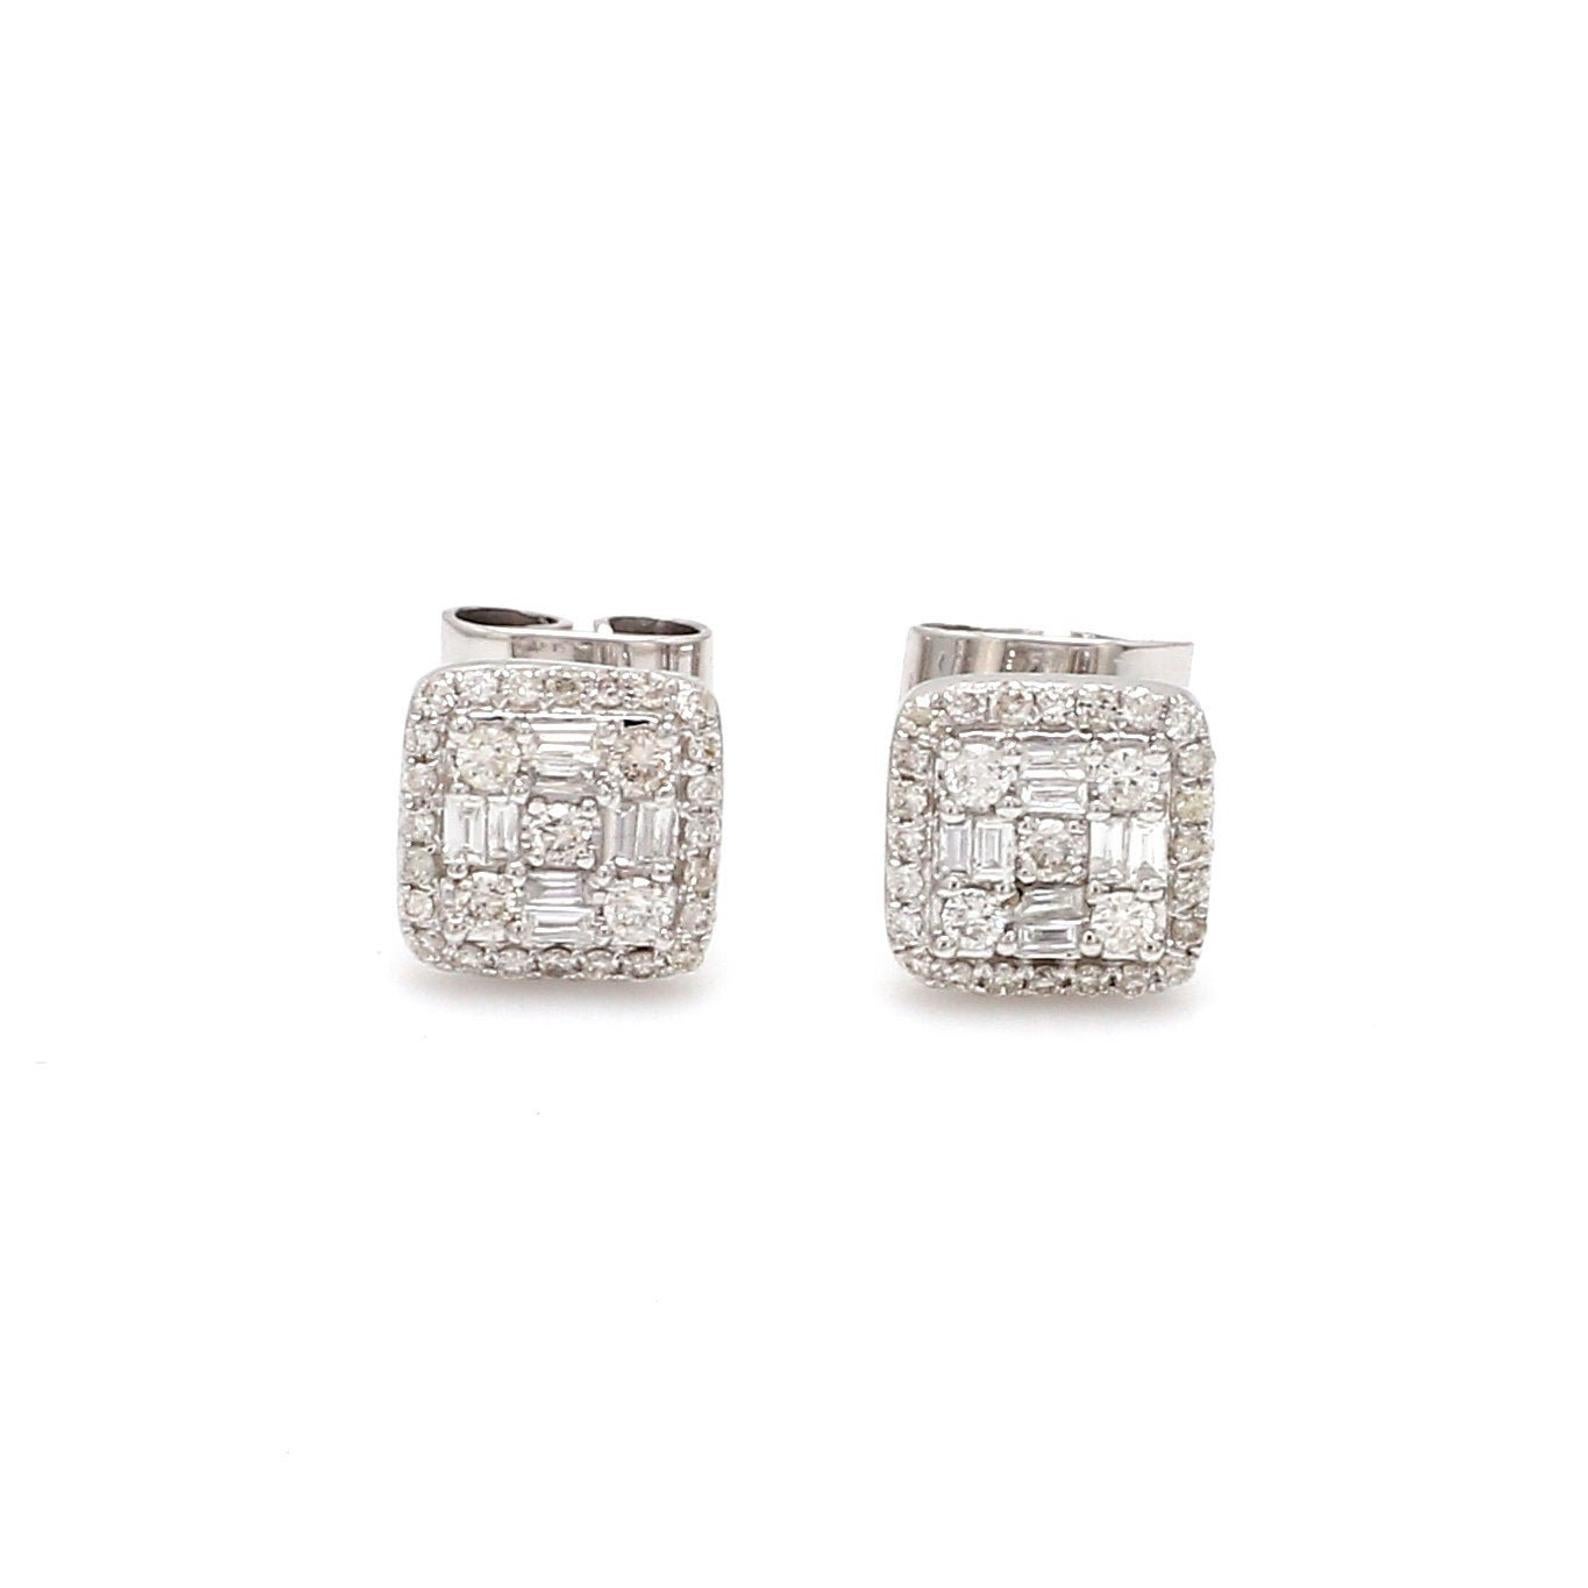 These stud earrings are crafted in 14-karat white gold and hand set with .35 carats of diamonds. Available in white, rose and yellow gold.  

FOLLOW MEGHNA JEWELS storefront to view the latest collection & exclusive pieces. Meghna Jewels is proudly